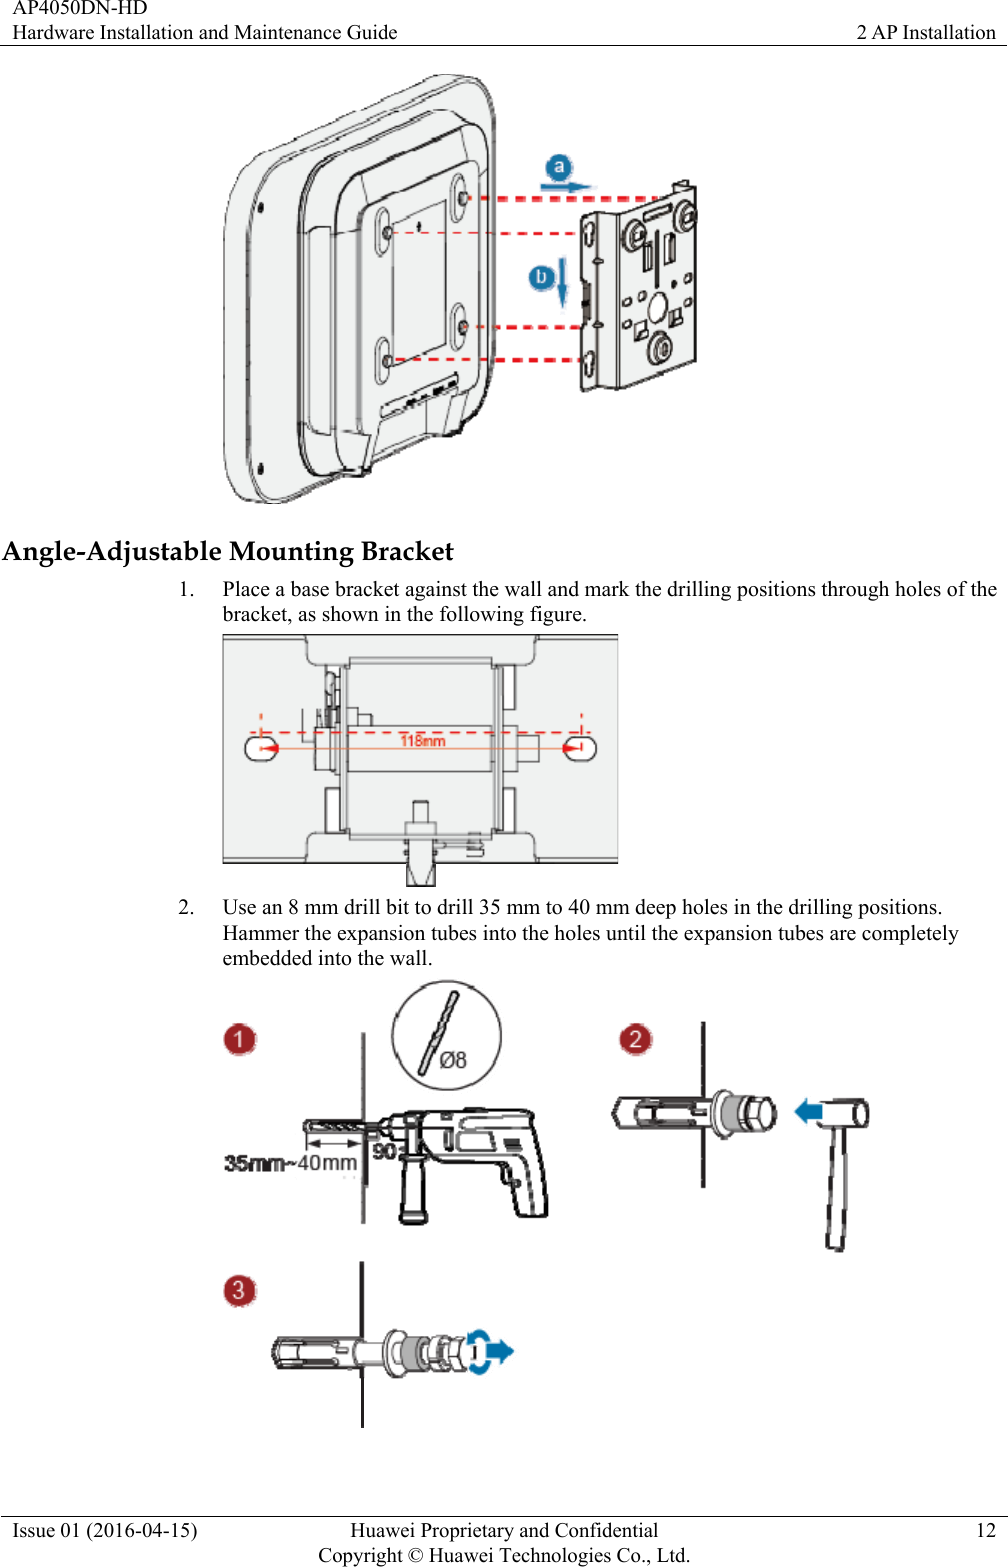 AP4050DN-HD Hardware Installation and Maintenance Guide  2 AP Installation Issue 01 (2016-04-15)  Huawei Proprietary and Confidential         Copyright © Huawei Technologies Co., Ltd.12  Angle-Adjustable Mounting Bracket 1. Place a base bracket against the wall and mark the drilling positions through holes of the bracket, as shown in the following figure.  2. Use an 8 mm drill bit to drill 35 mm to 40 mm deep holes in the drilling positions. Hammer the expansion tubes into the holes until the expansion tubes are completely embedded into the wall.  